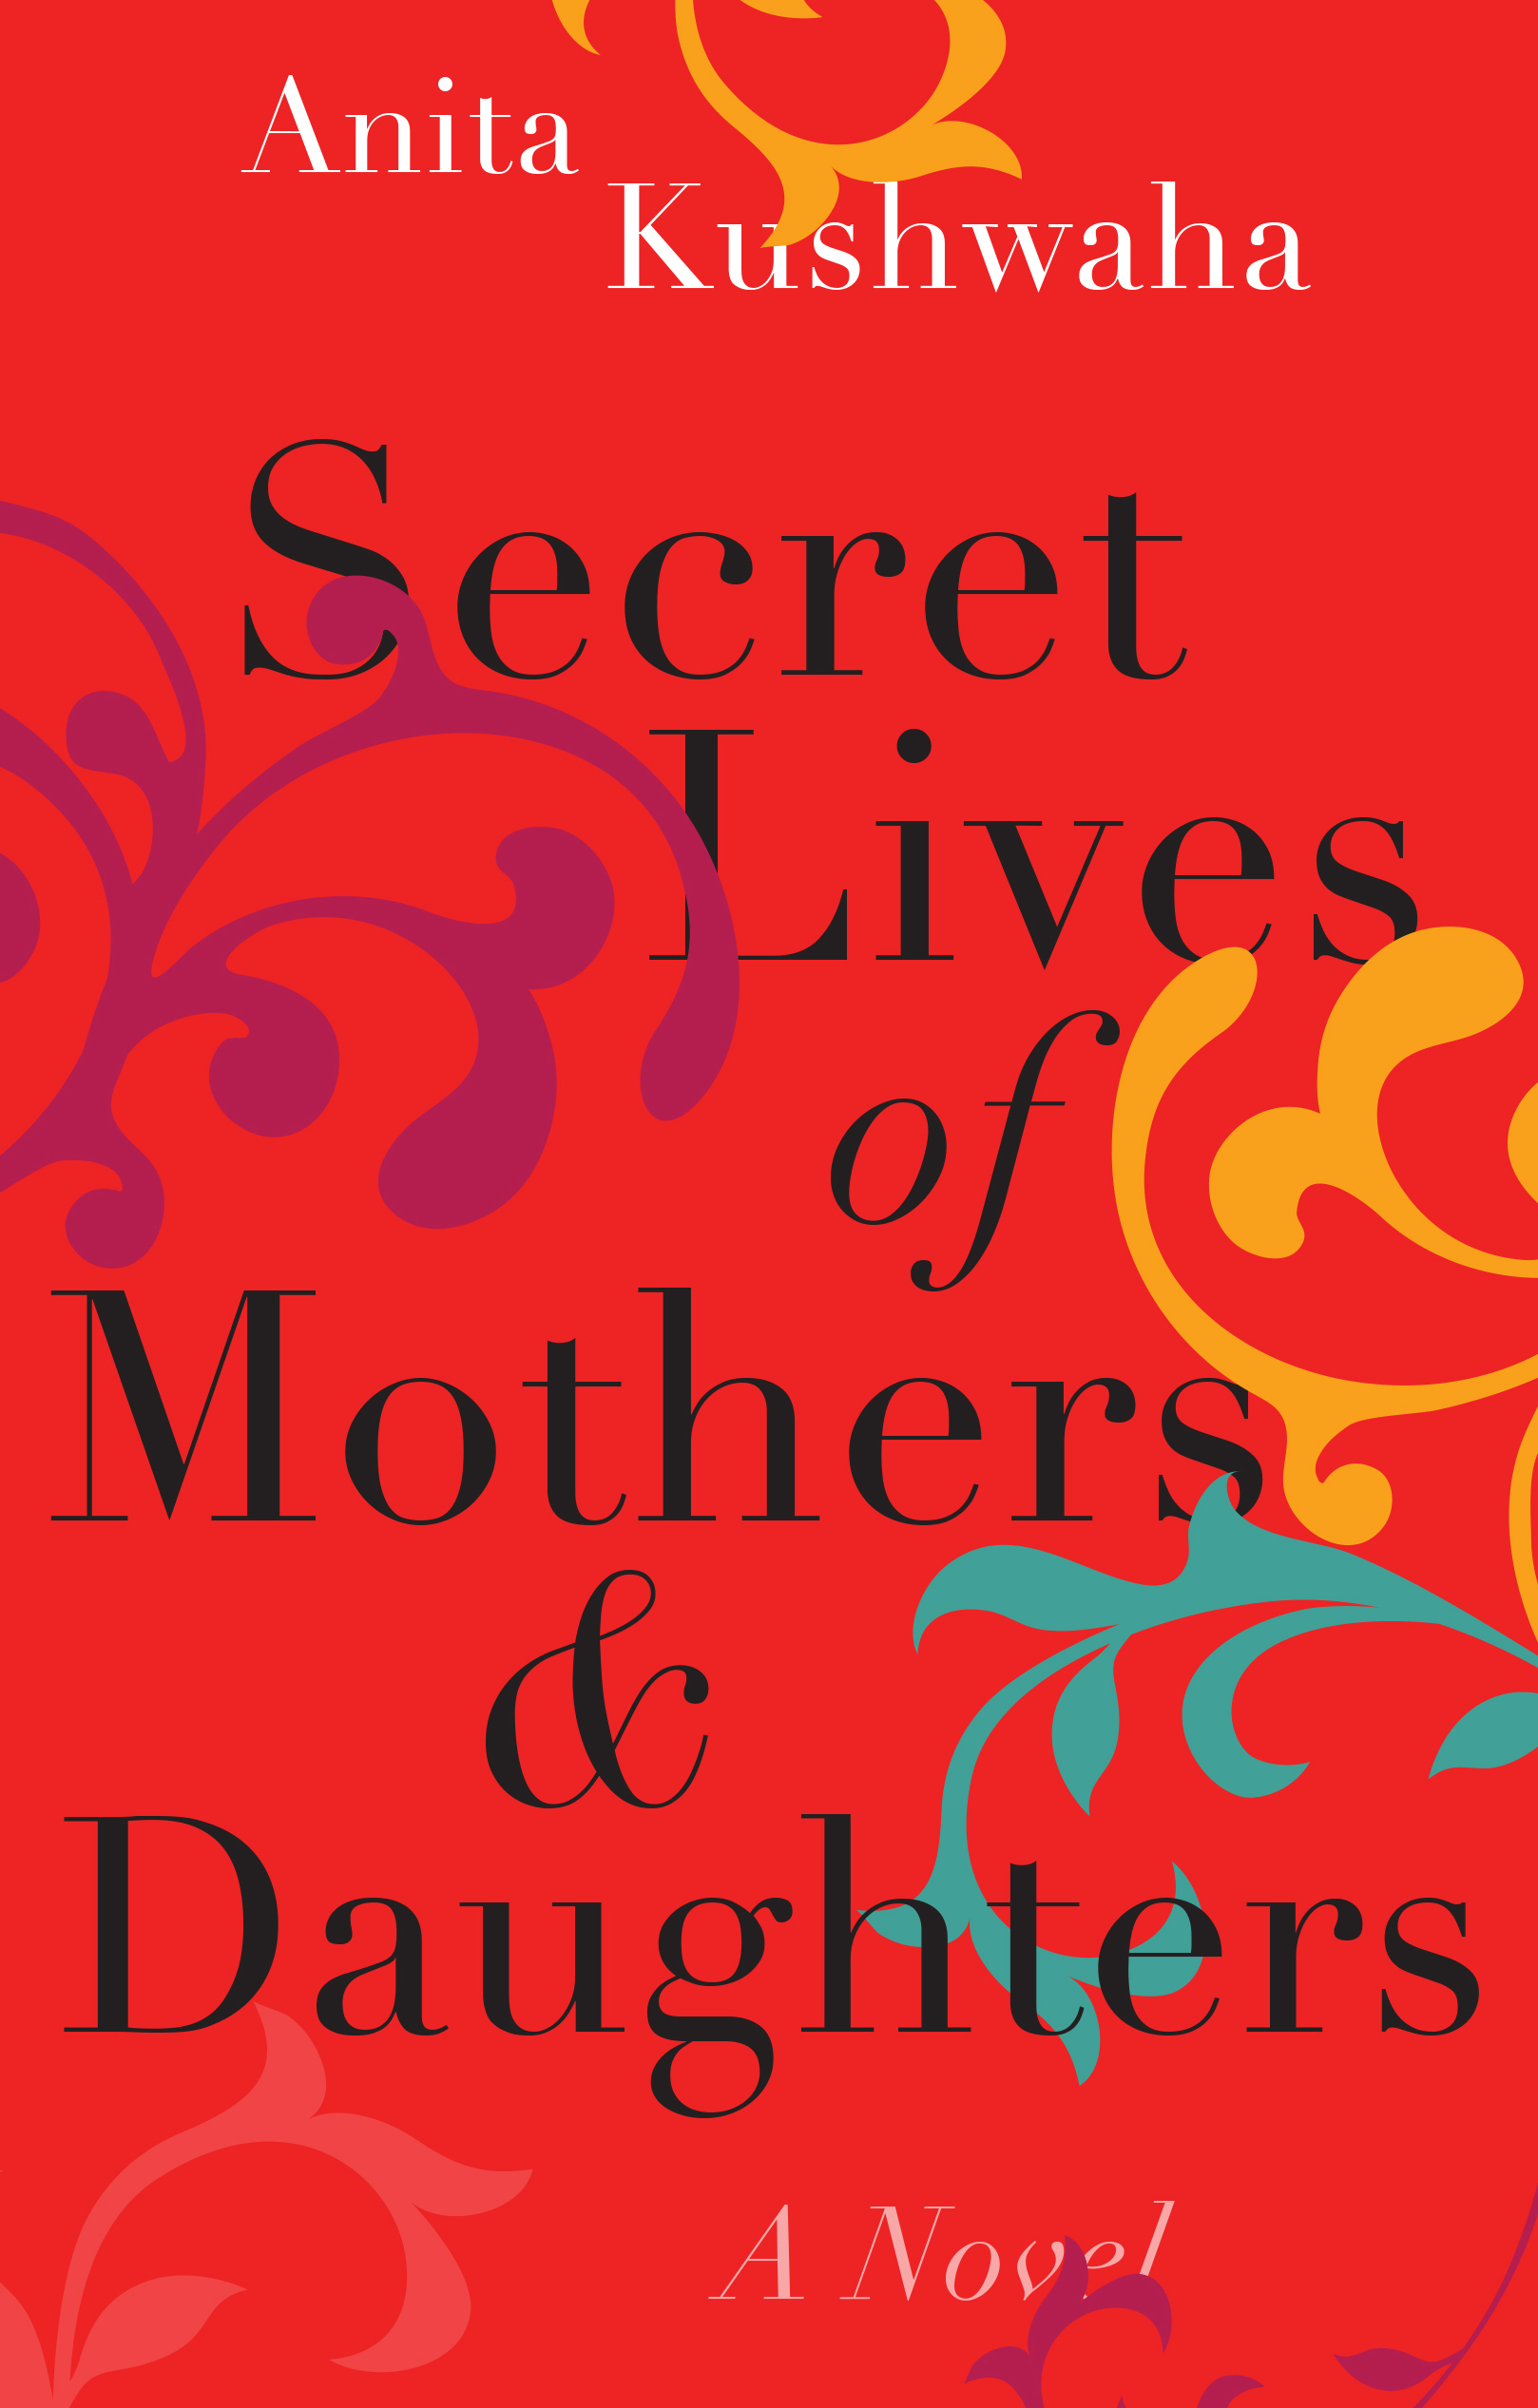 Book cover of, "The Secret Lives of Mothers and Daughters"